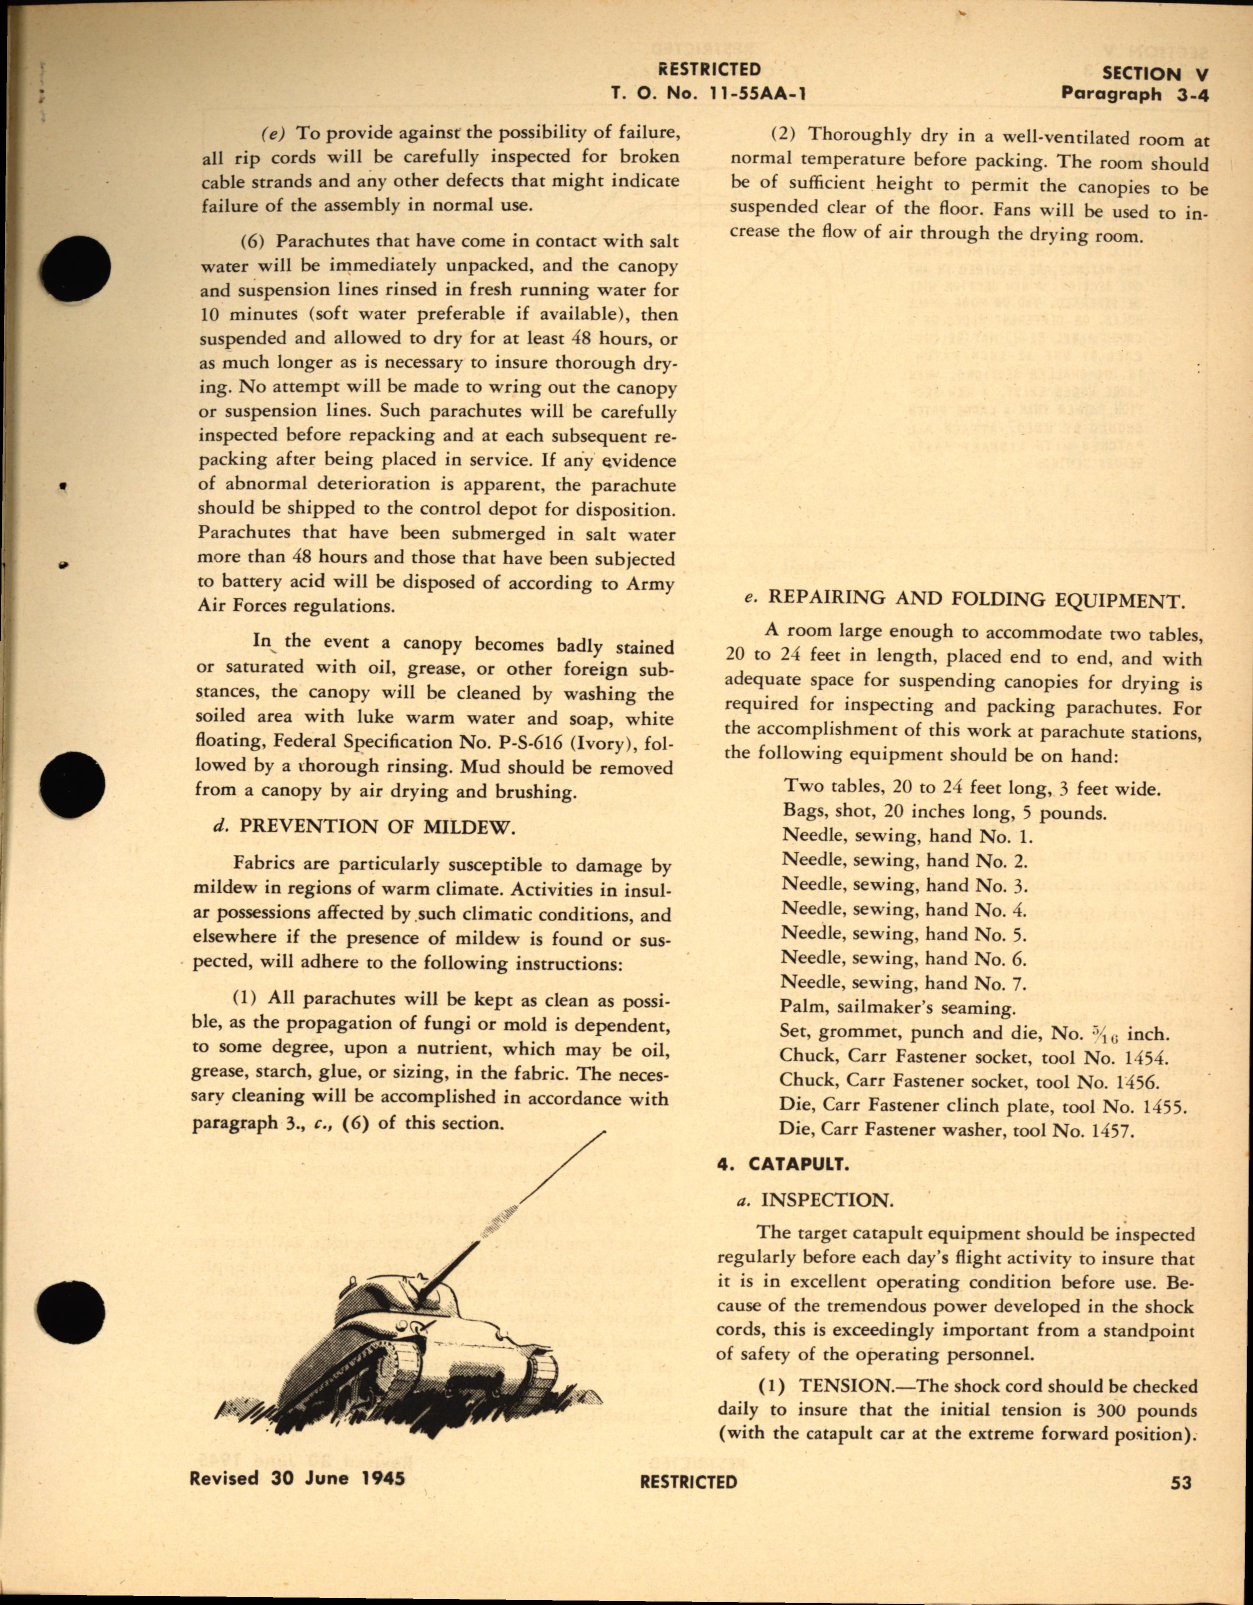 Sample page 7 from AirCorps Library document: Operation, Service, & Overhaul Instructions for Radio-Controlled Power Driven Aerial Target